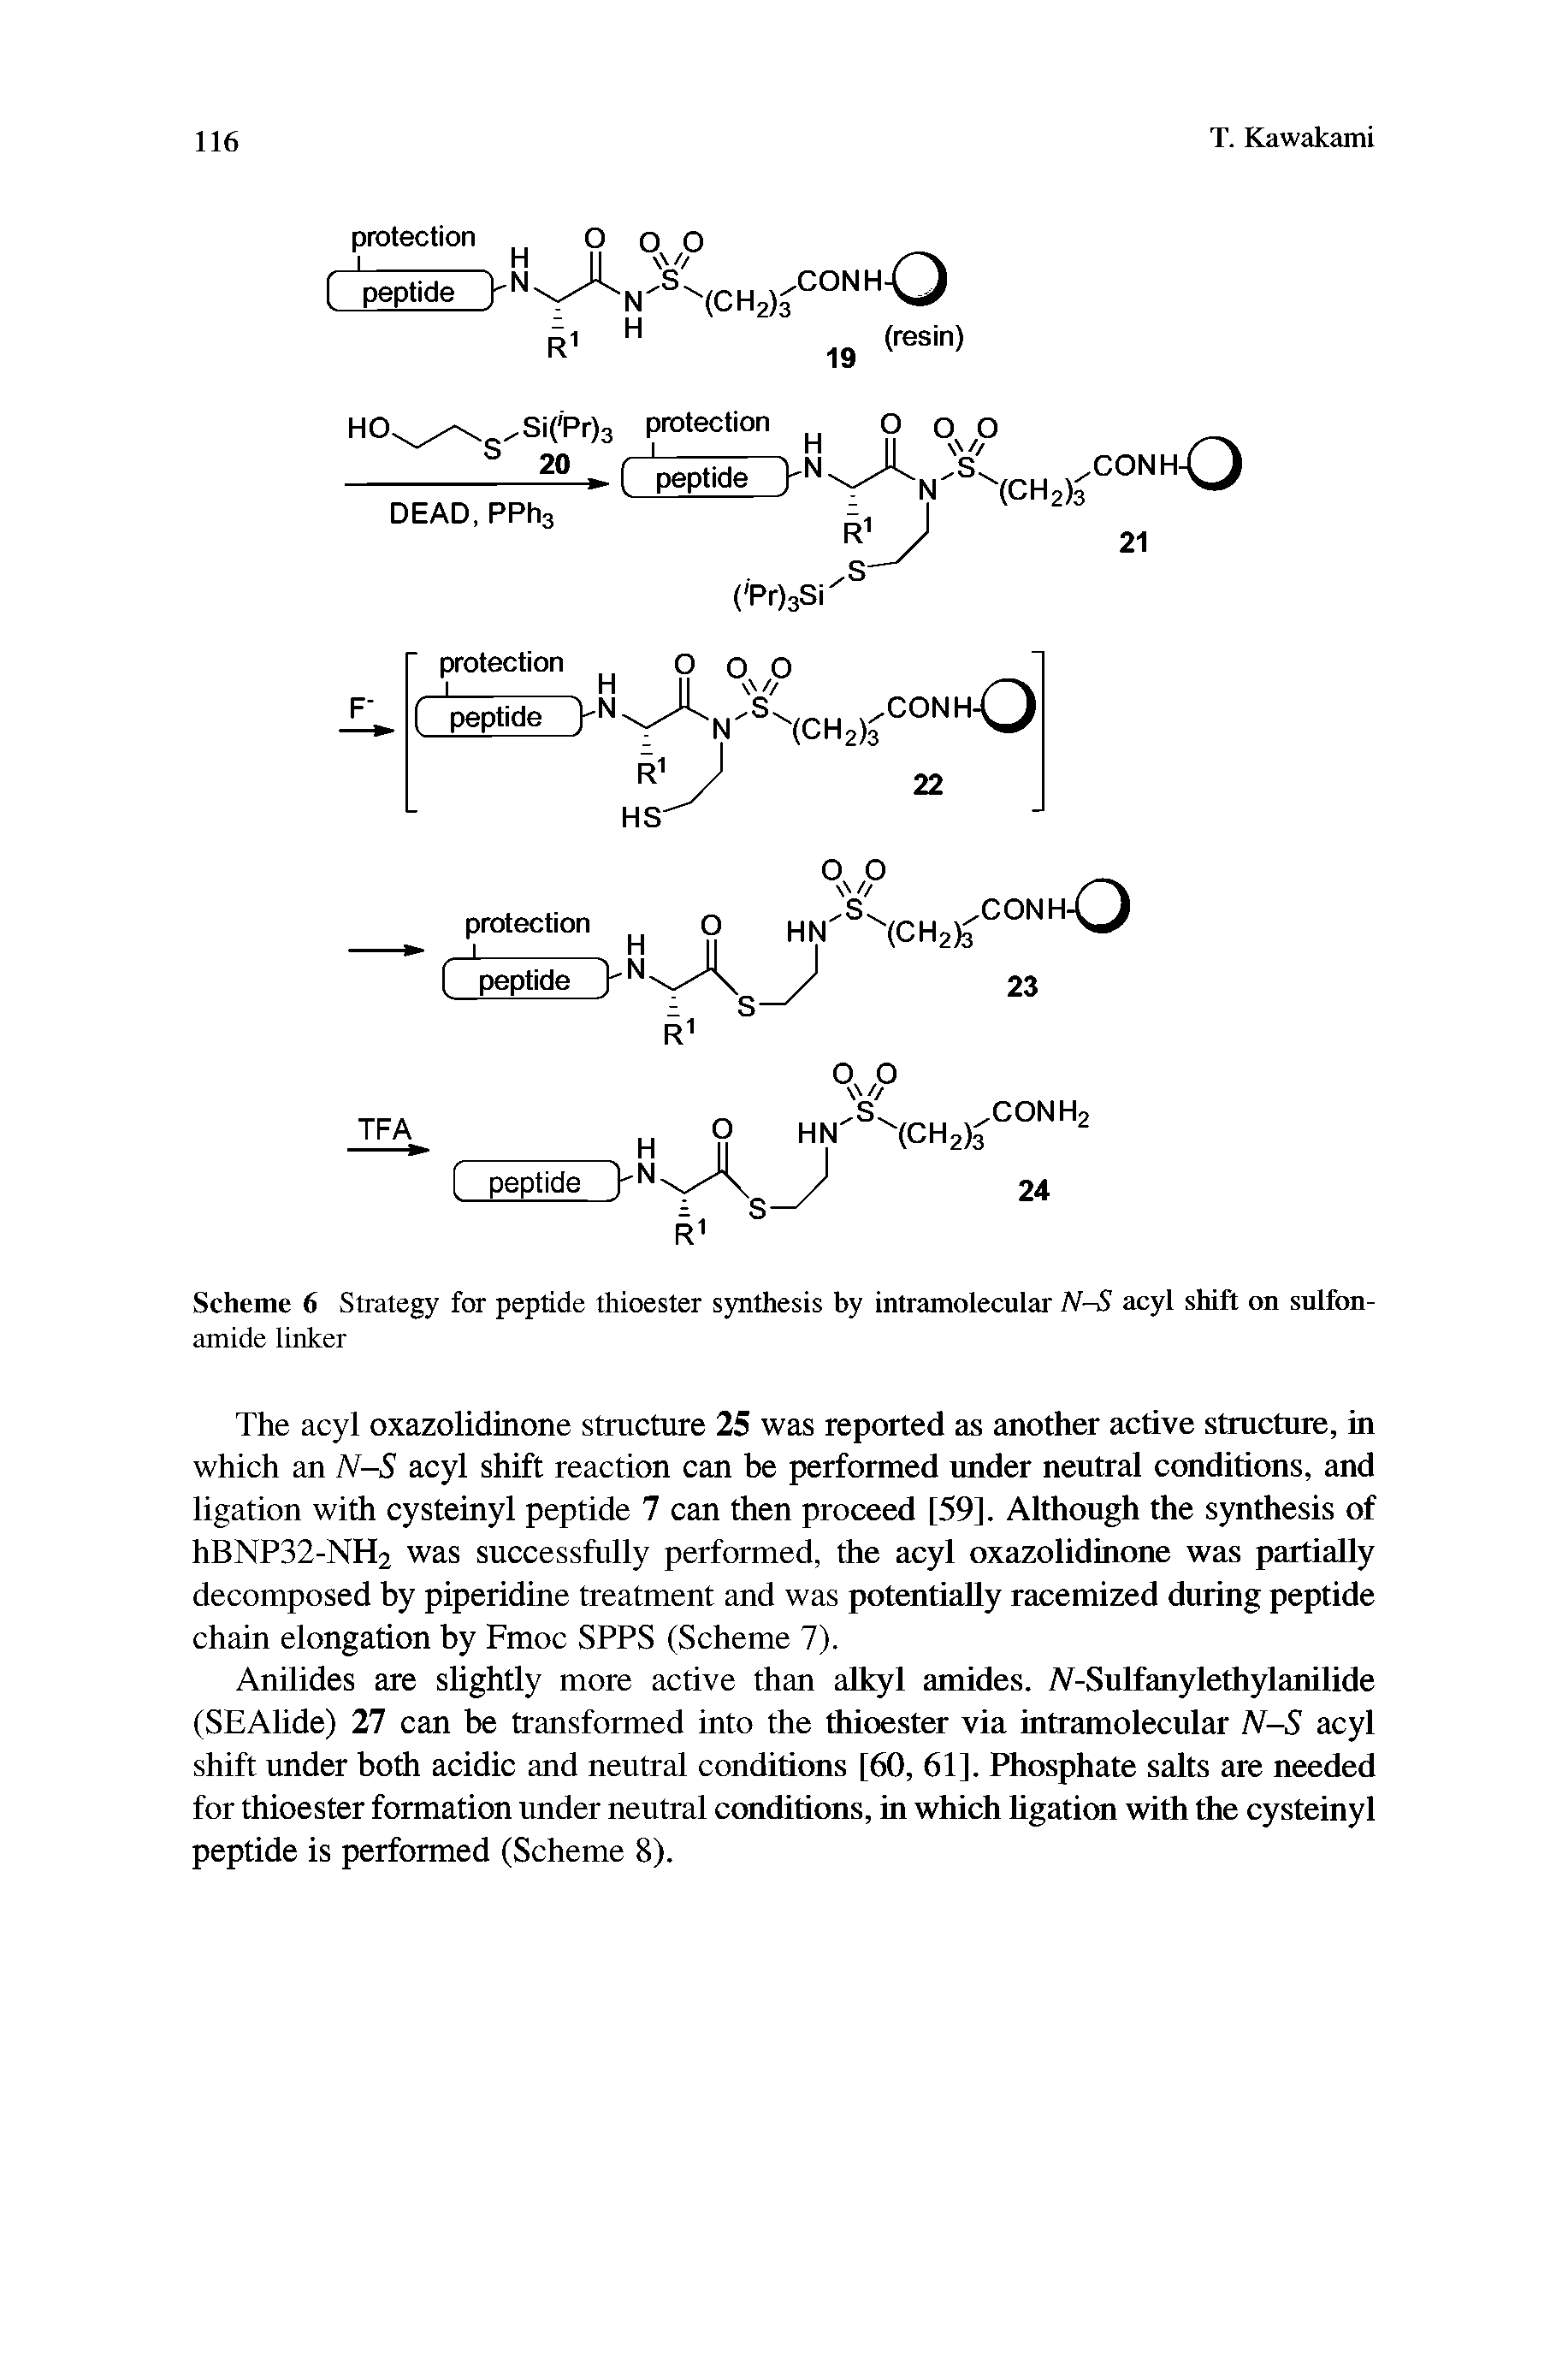 Scheme 6 Strategy for peptide thioester synthesis by intramolecular NS acyl shift on sulfonamide linker...